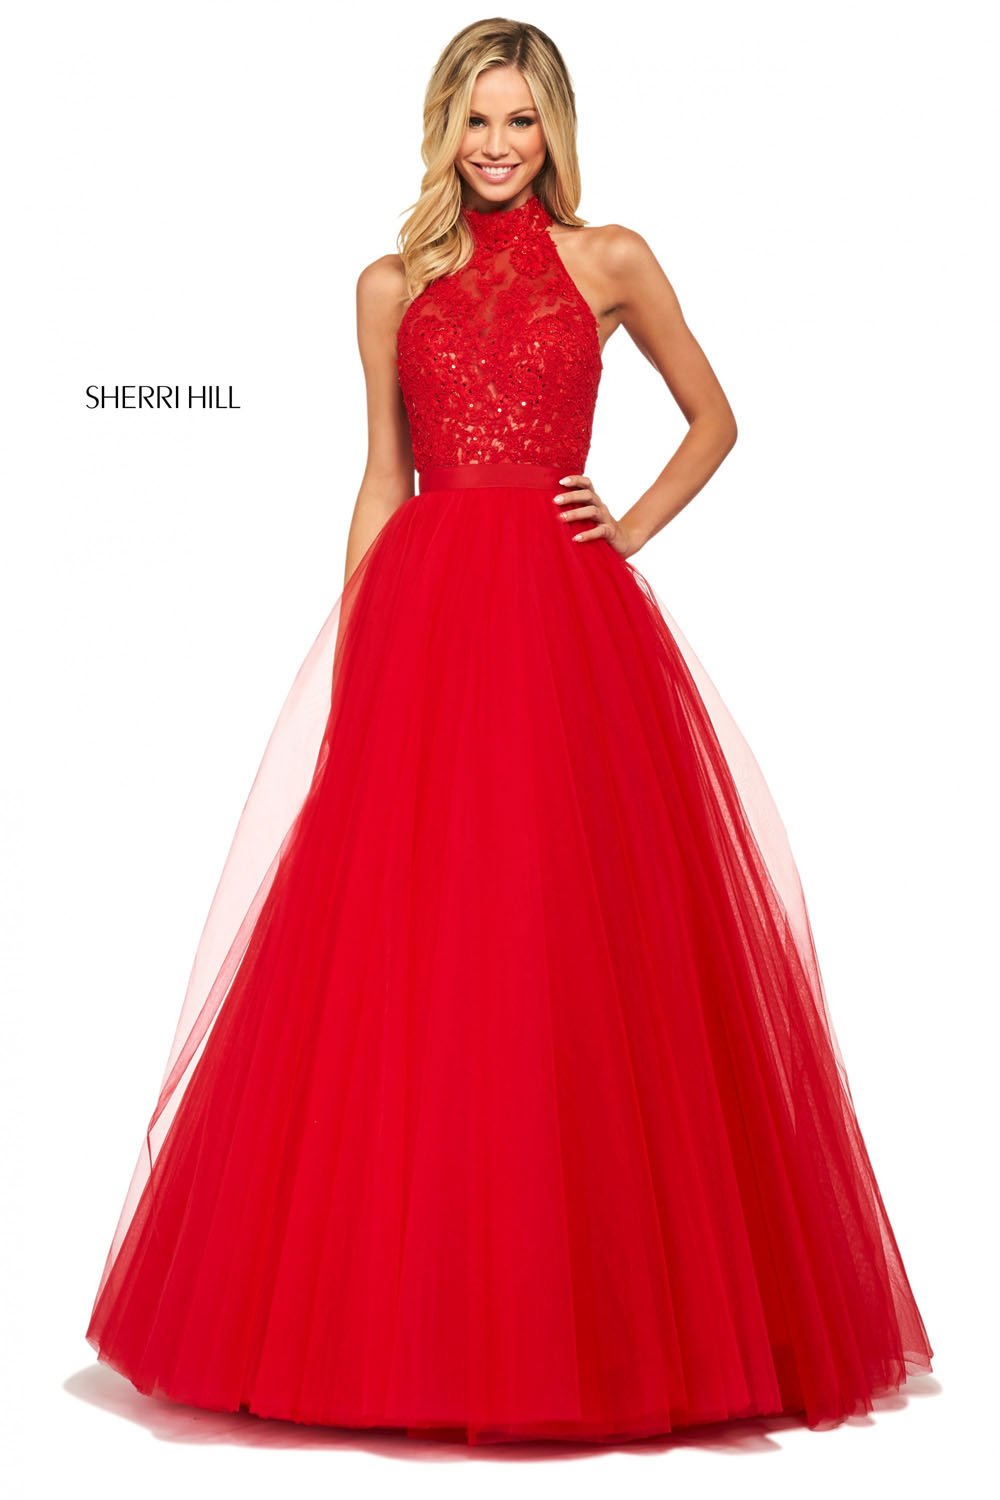 Sherri Hill 53727 dress images in these colors: Light Blue, Blush, Red, Ivory, Yellow, Black.